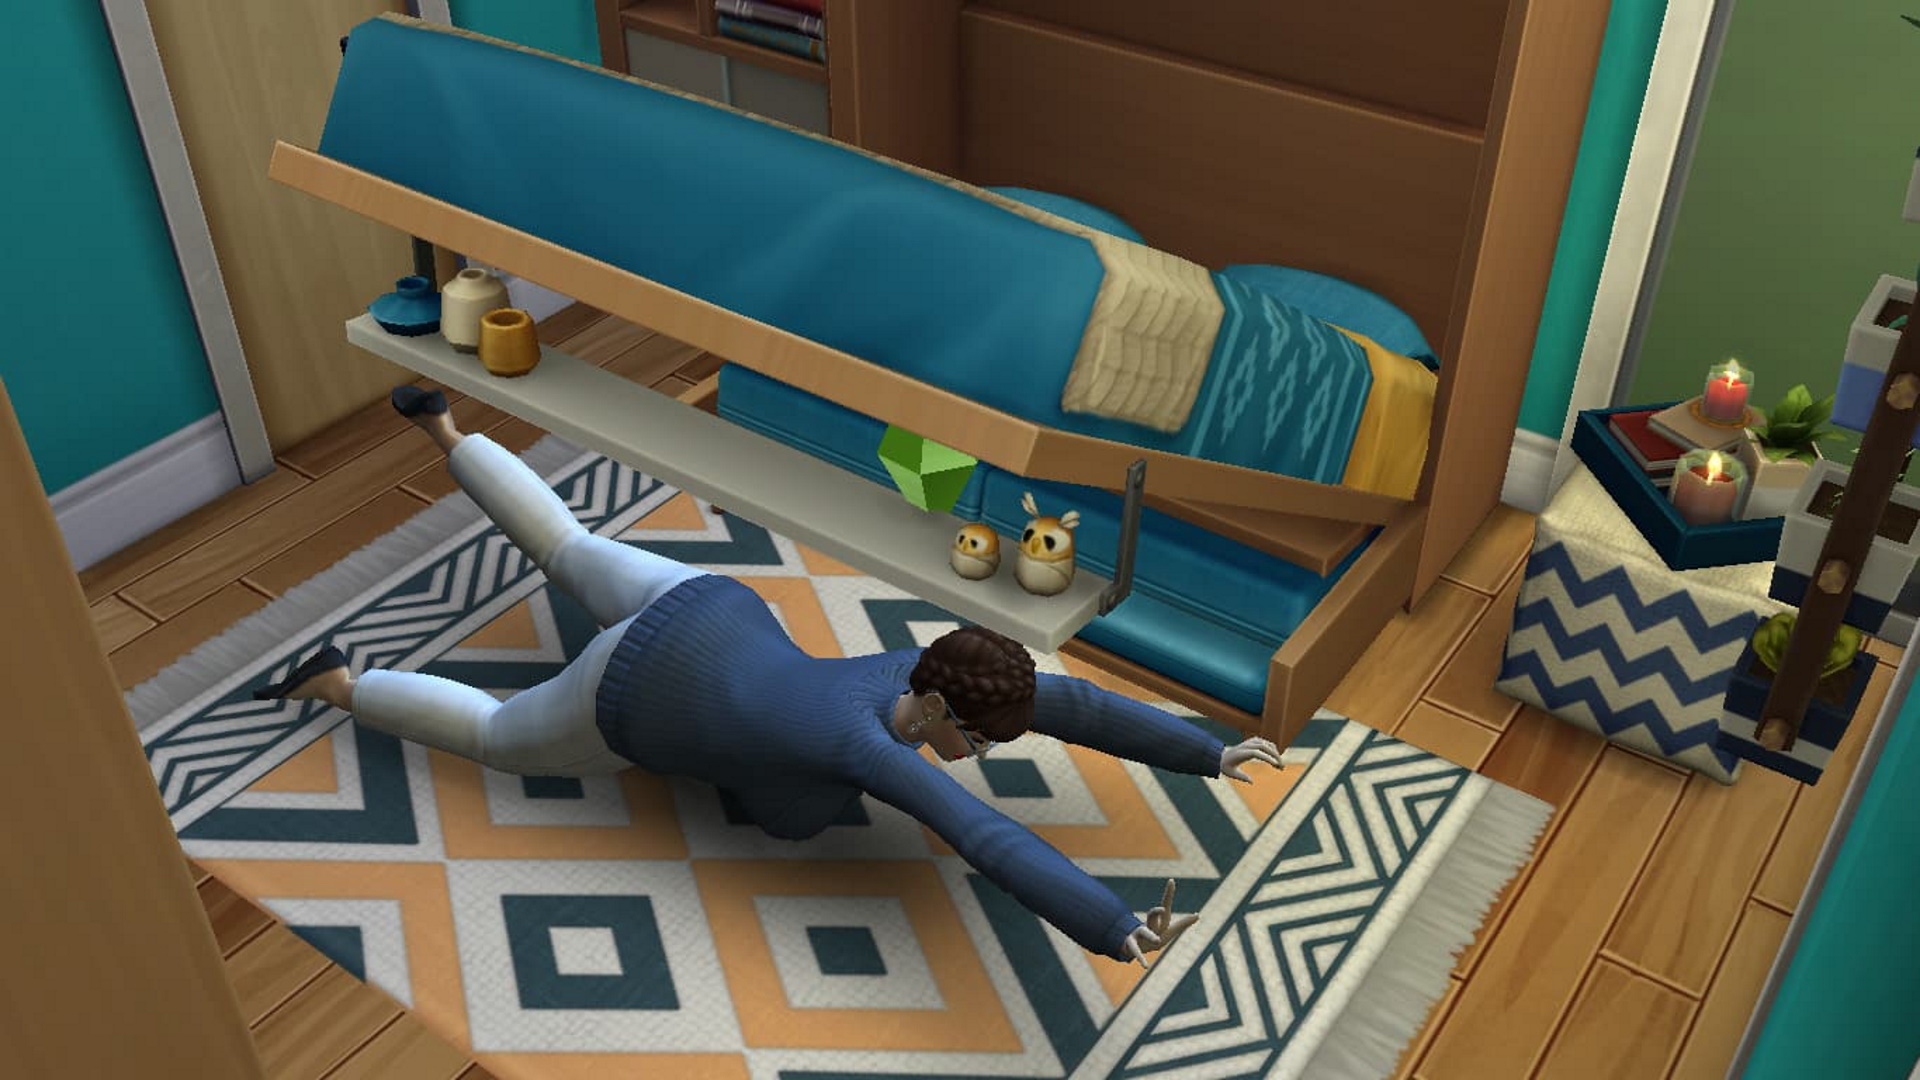 The Murphy Bed can't hurt you in this new Sims 4 mod